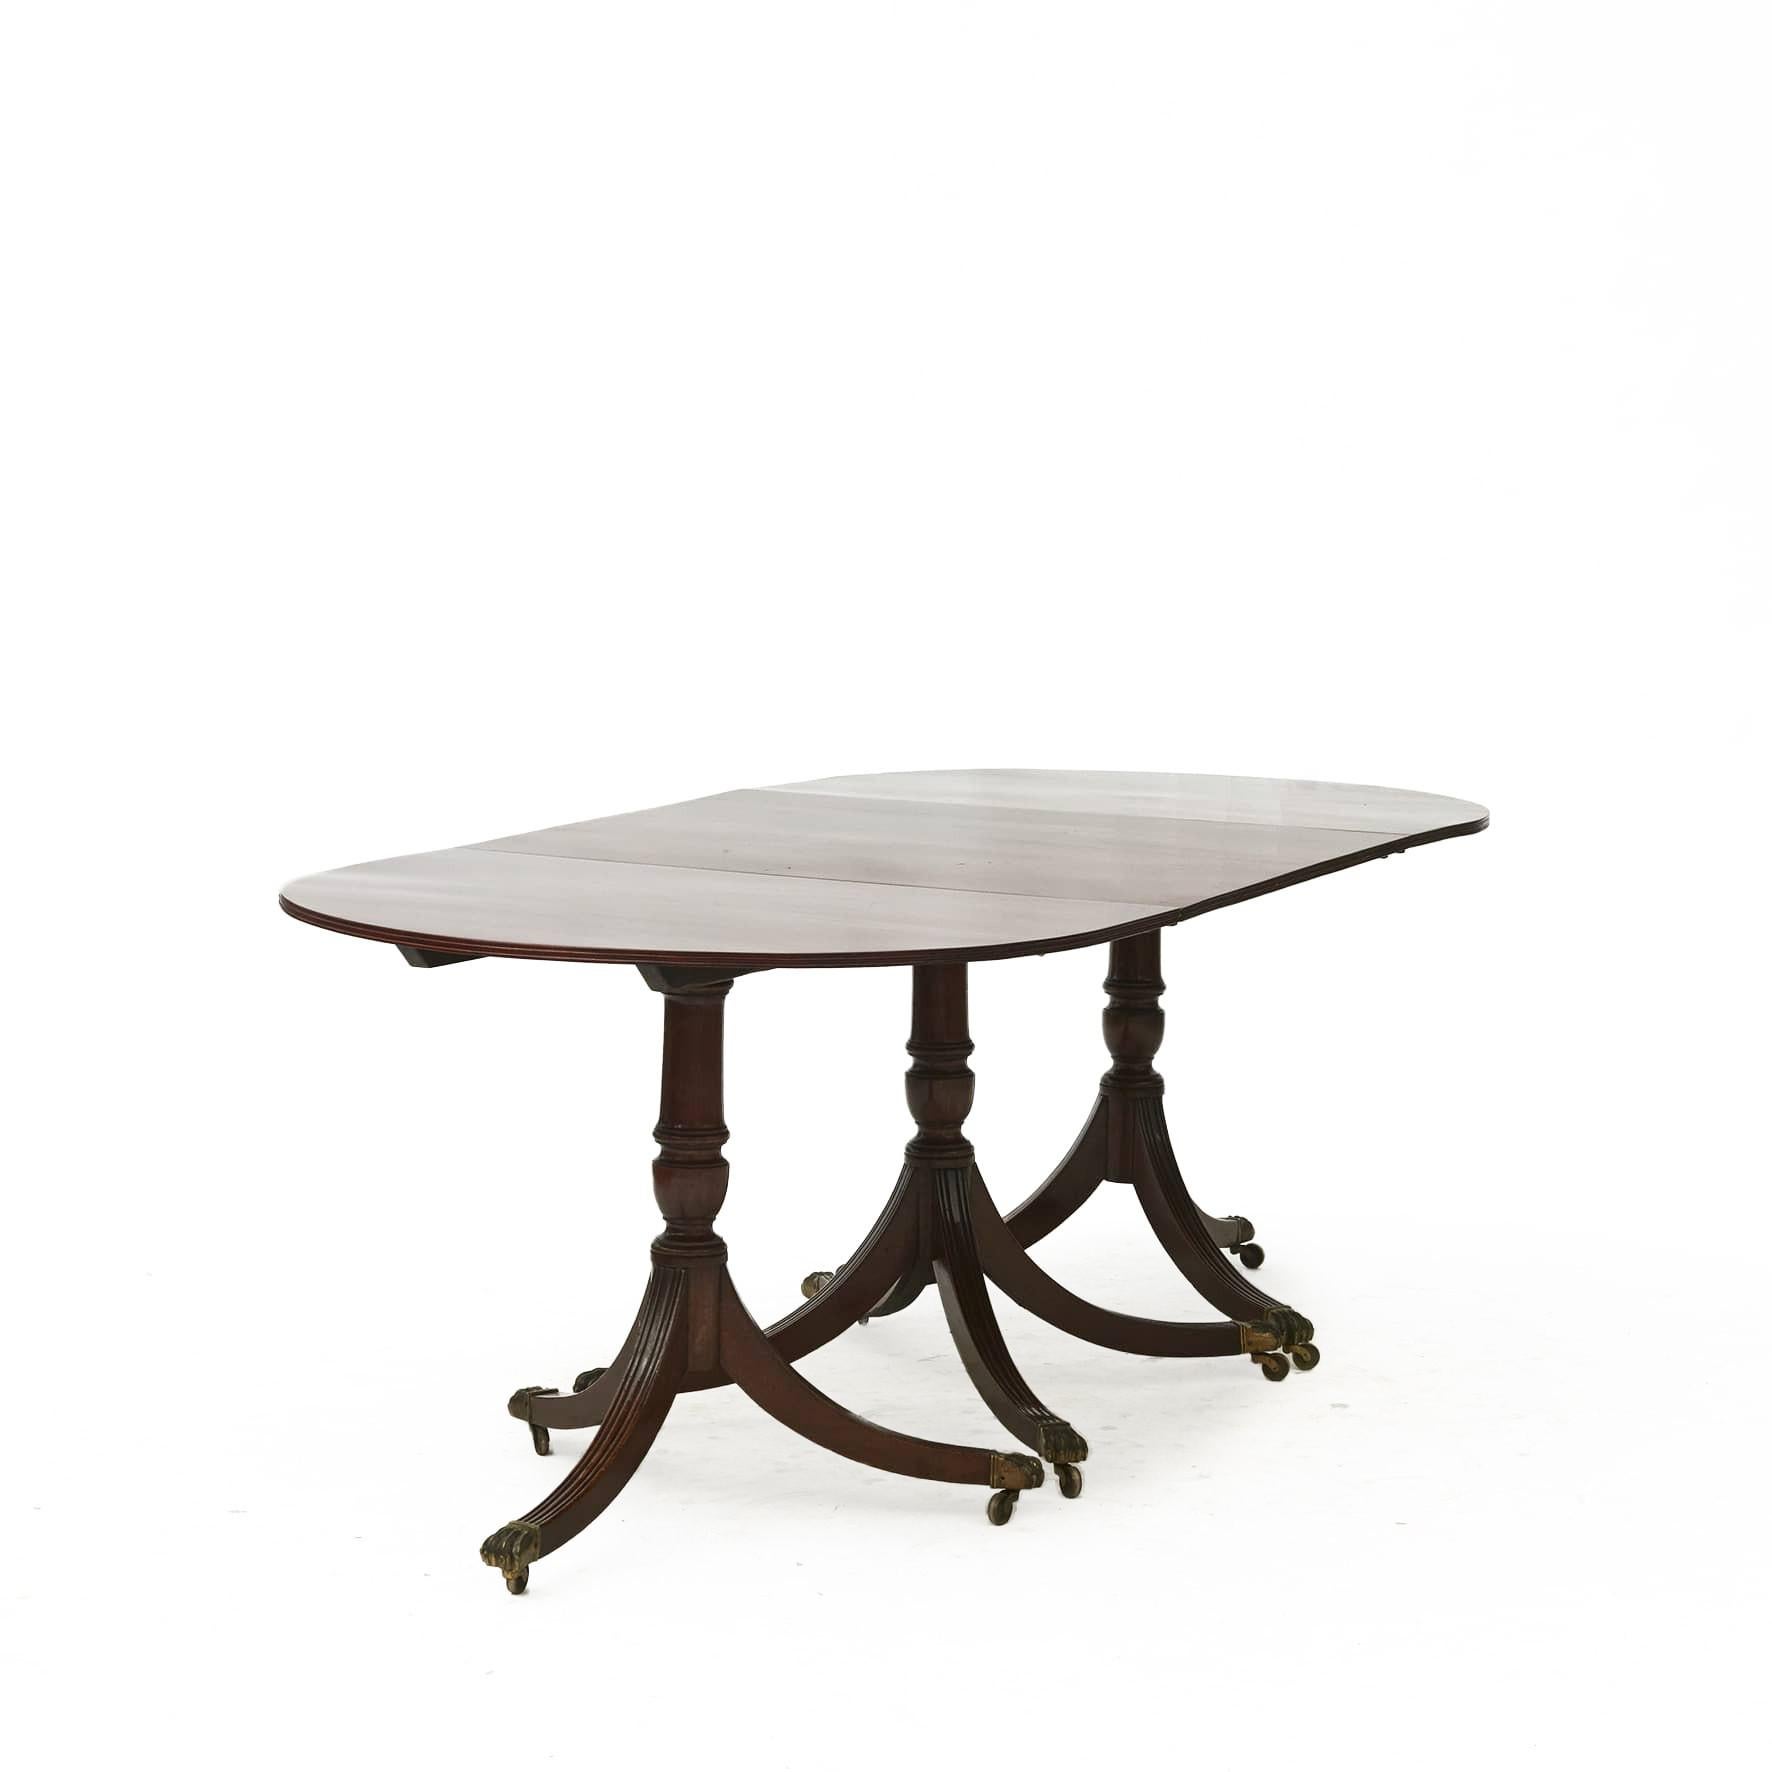 Regency style 3 pedestal dining table in solid mahogany with two extension leaves with demi lune ends. 
A reeded edge detail completes the look.
Raised up on three pedestals with turned pillars and four outswept reeded legs, ending on bronze lion’s